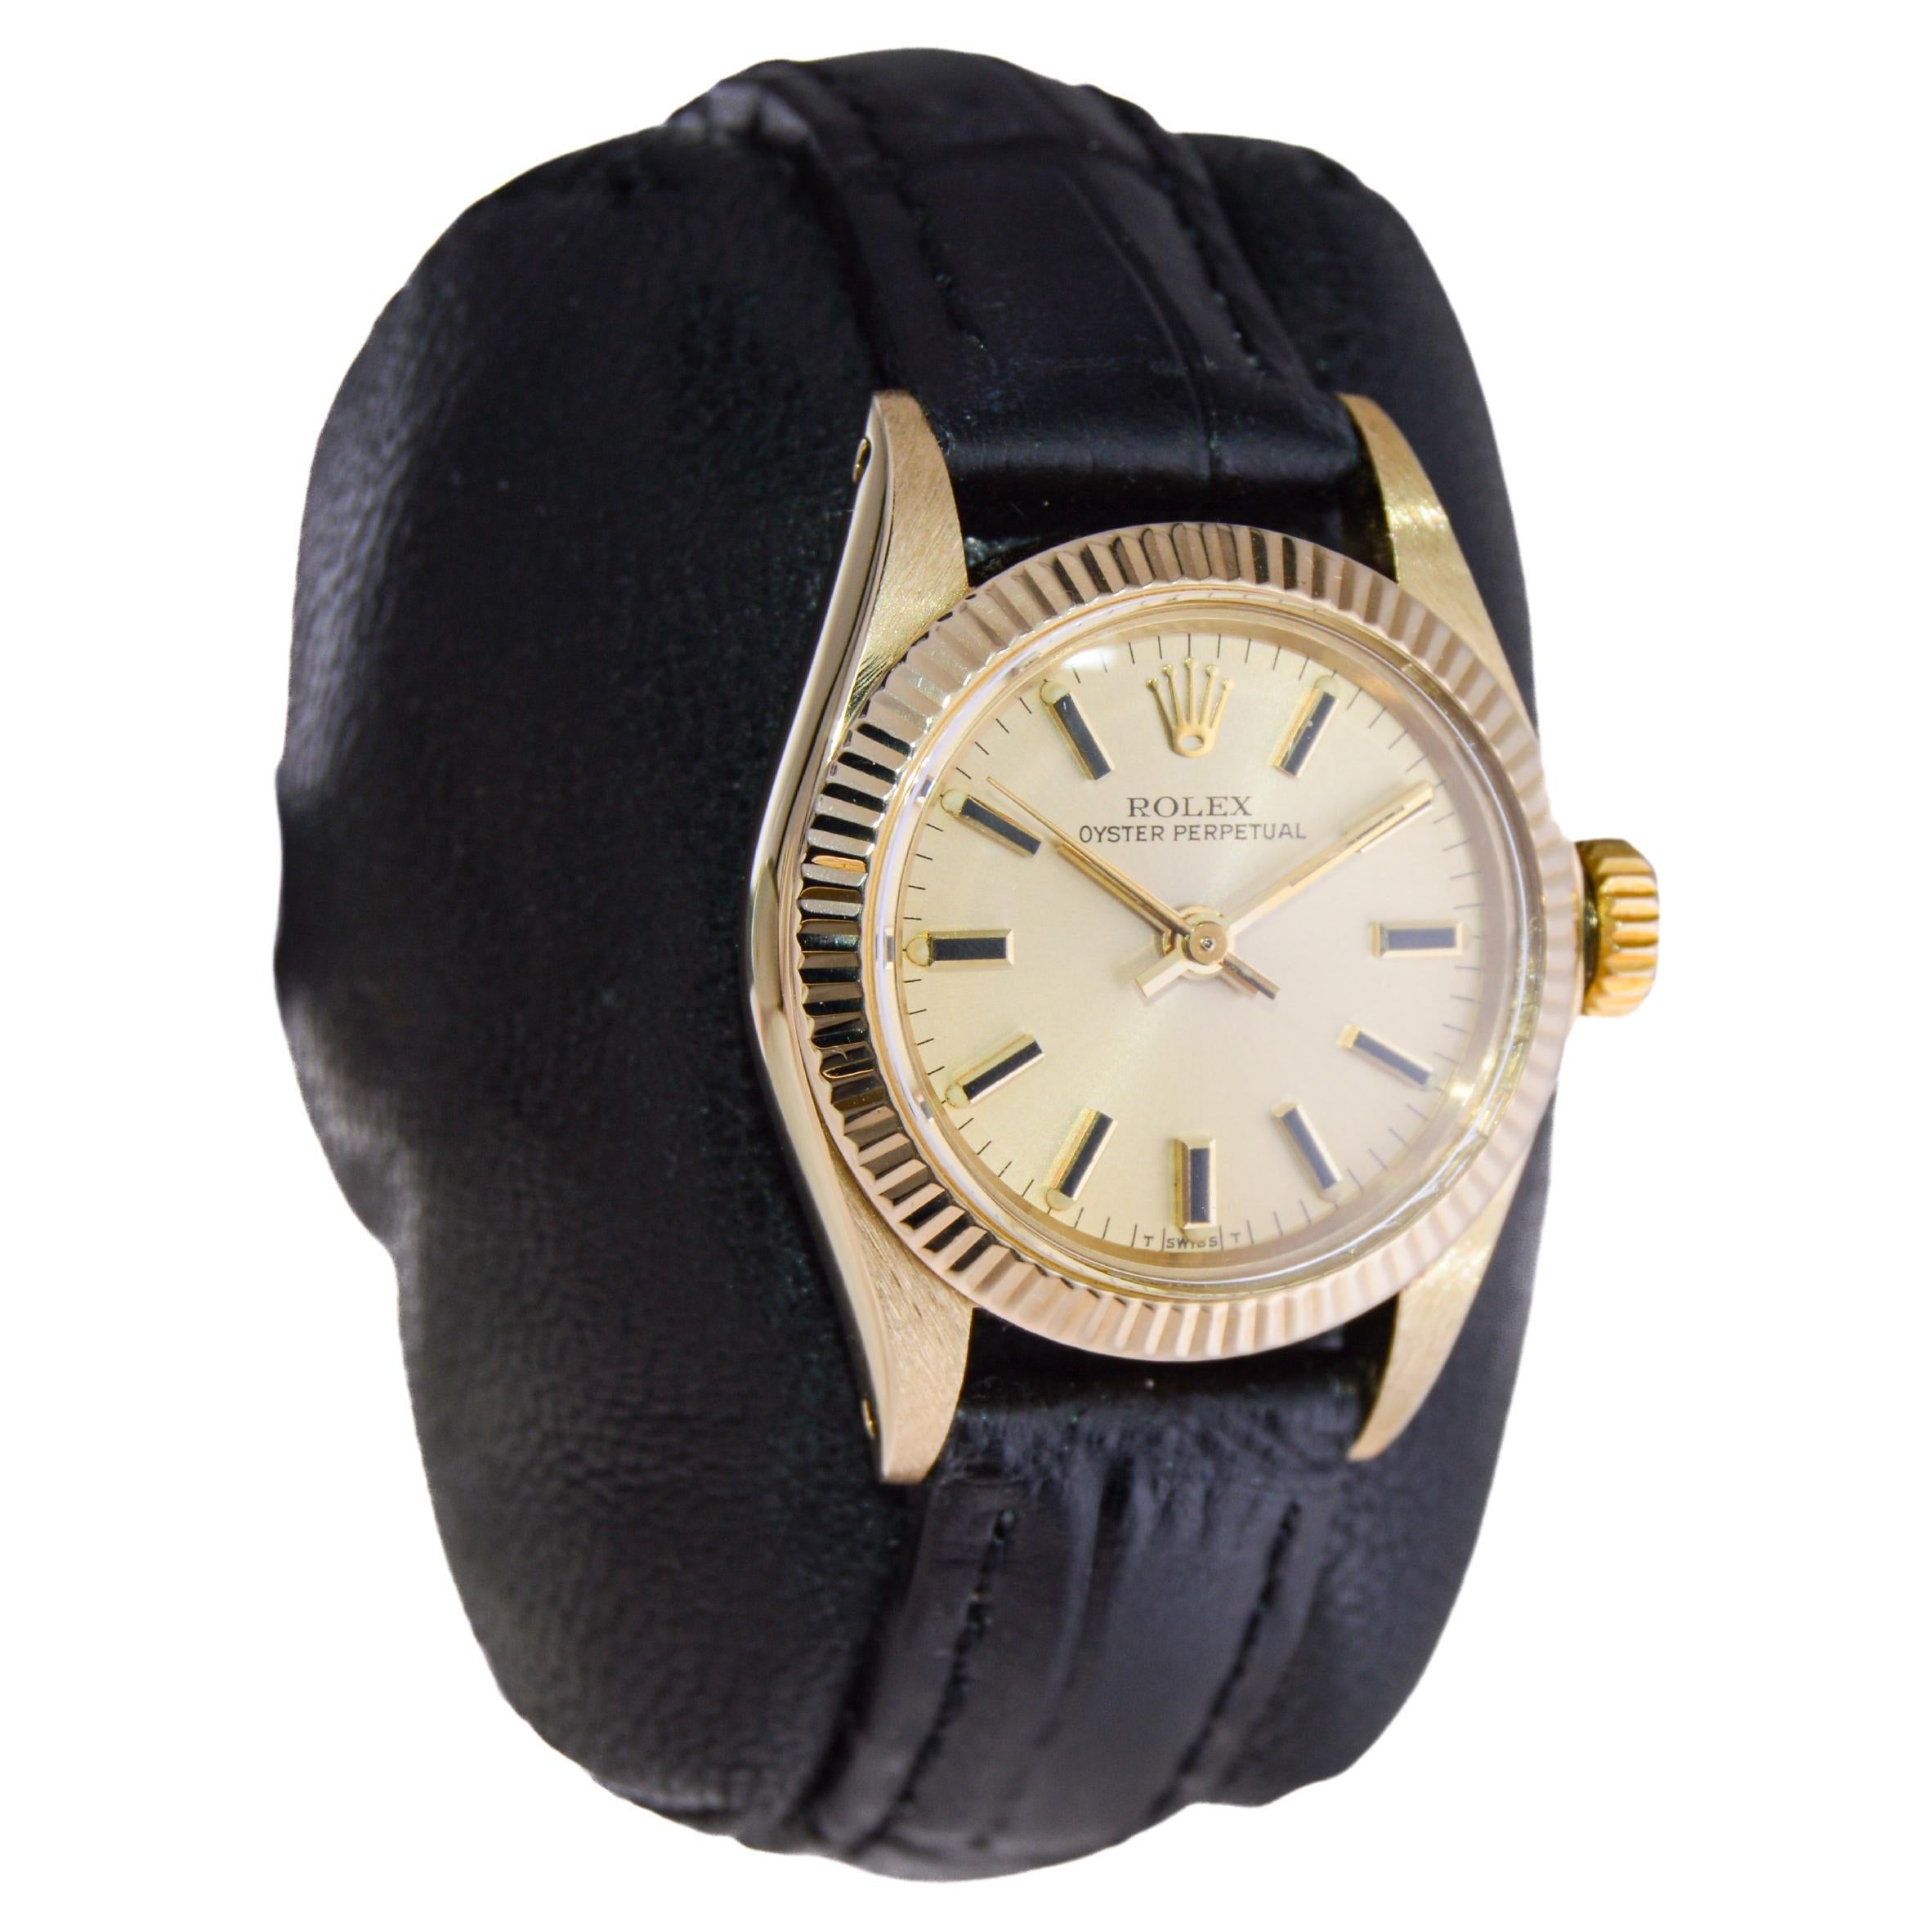 FACTORY / HOUSE: Rolex Watch Company
STYLE / REFERENCE: Oyster Perpetual / Reference 6719
METAL / MATERIAL: 14Kt Solid Gold
CIRCA / YEAR: 1981
DIMENSIONS / SIZE: Length 32mm X Diameter 25mm
MOVEMENT / CALIBER: Perpetual Winding / 28 Jewels / Caliber